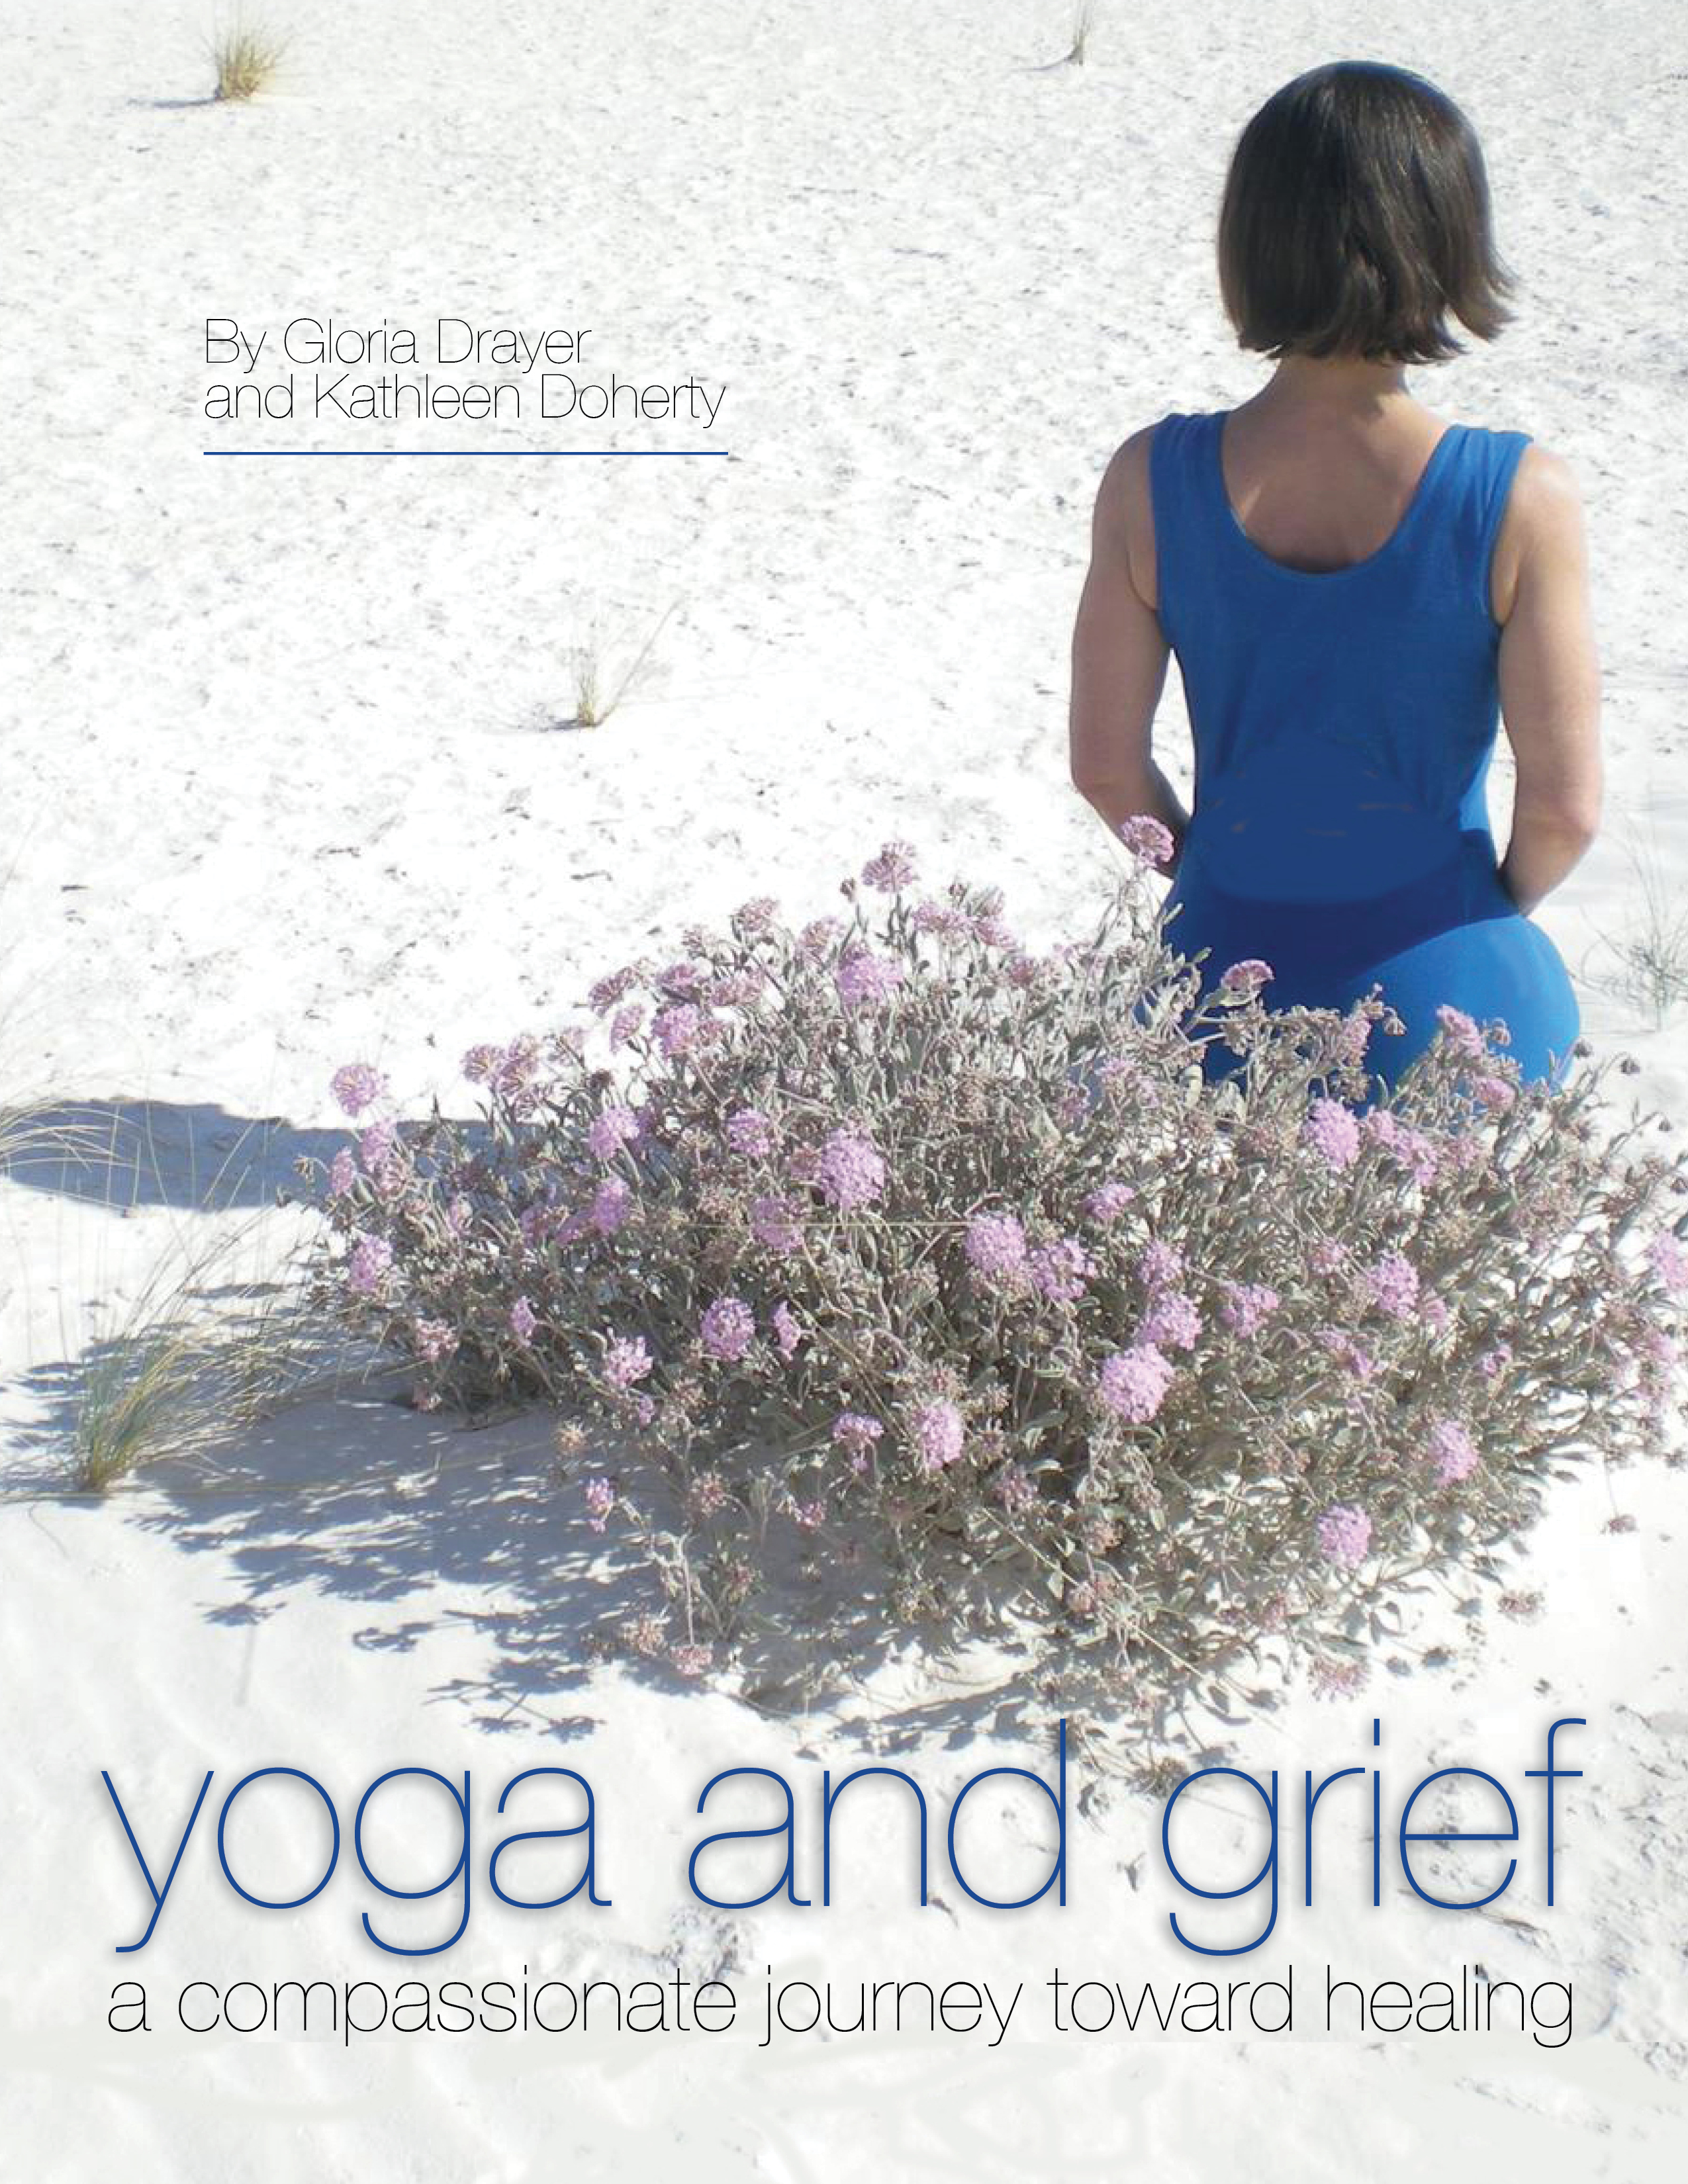 LA YOGA SPOTLIGHTS THE COMPASSION-BASED HEALING OF YOGA AND GRIEF